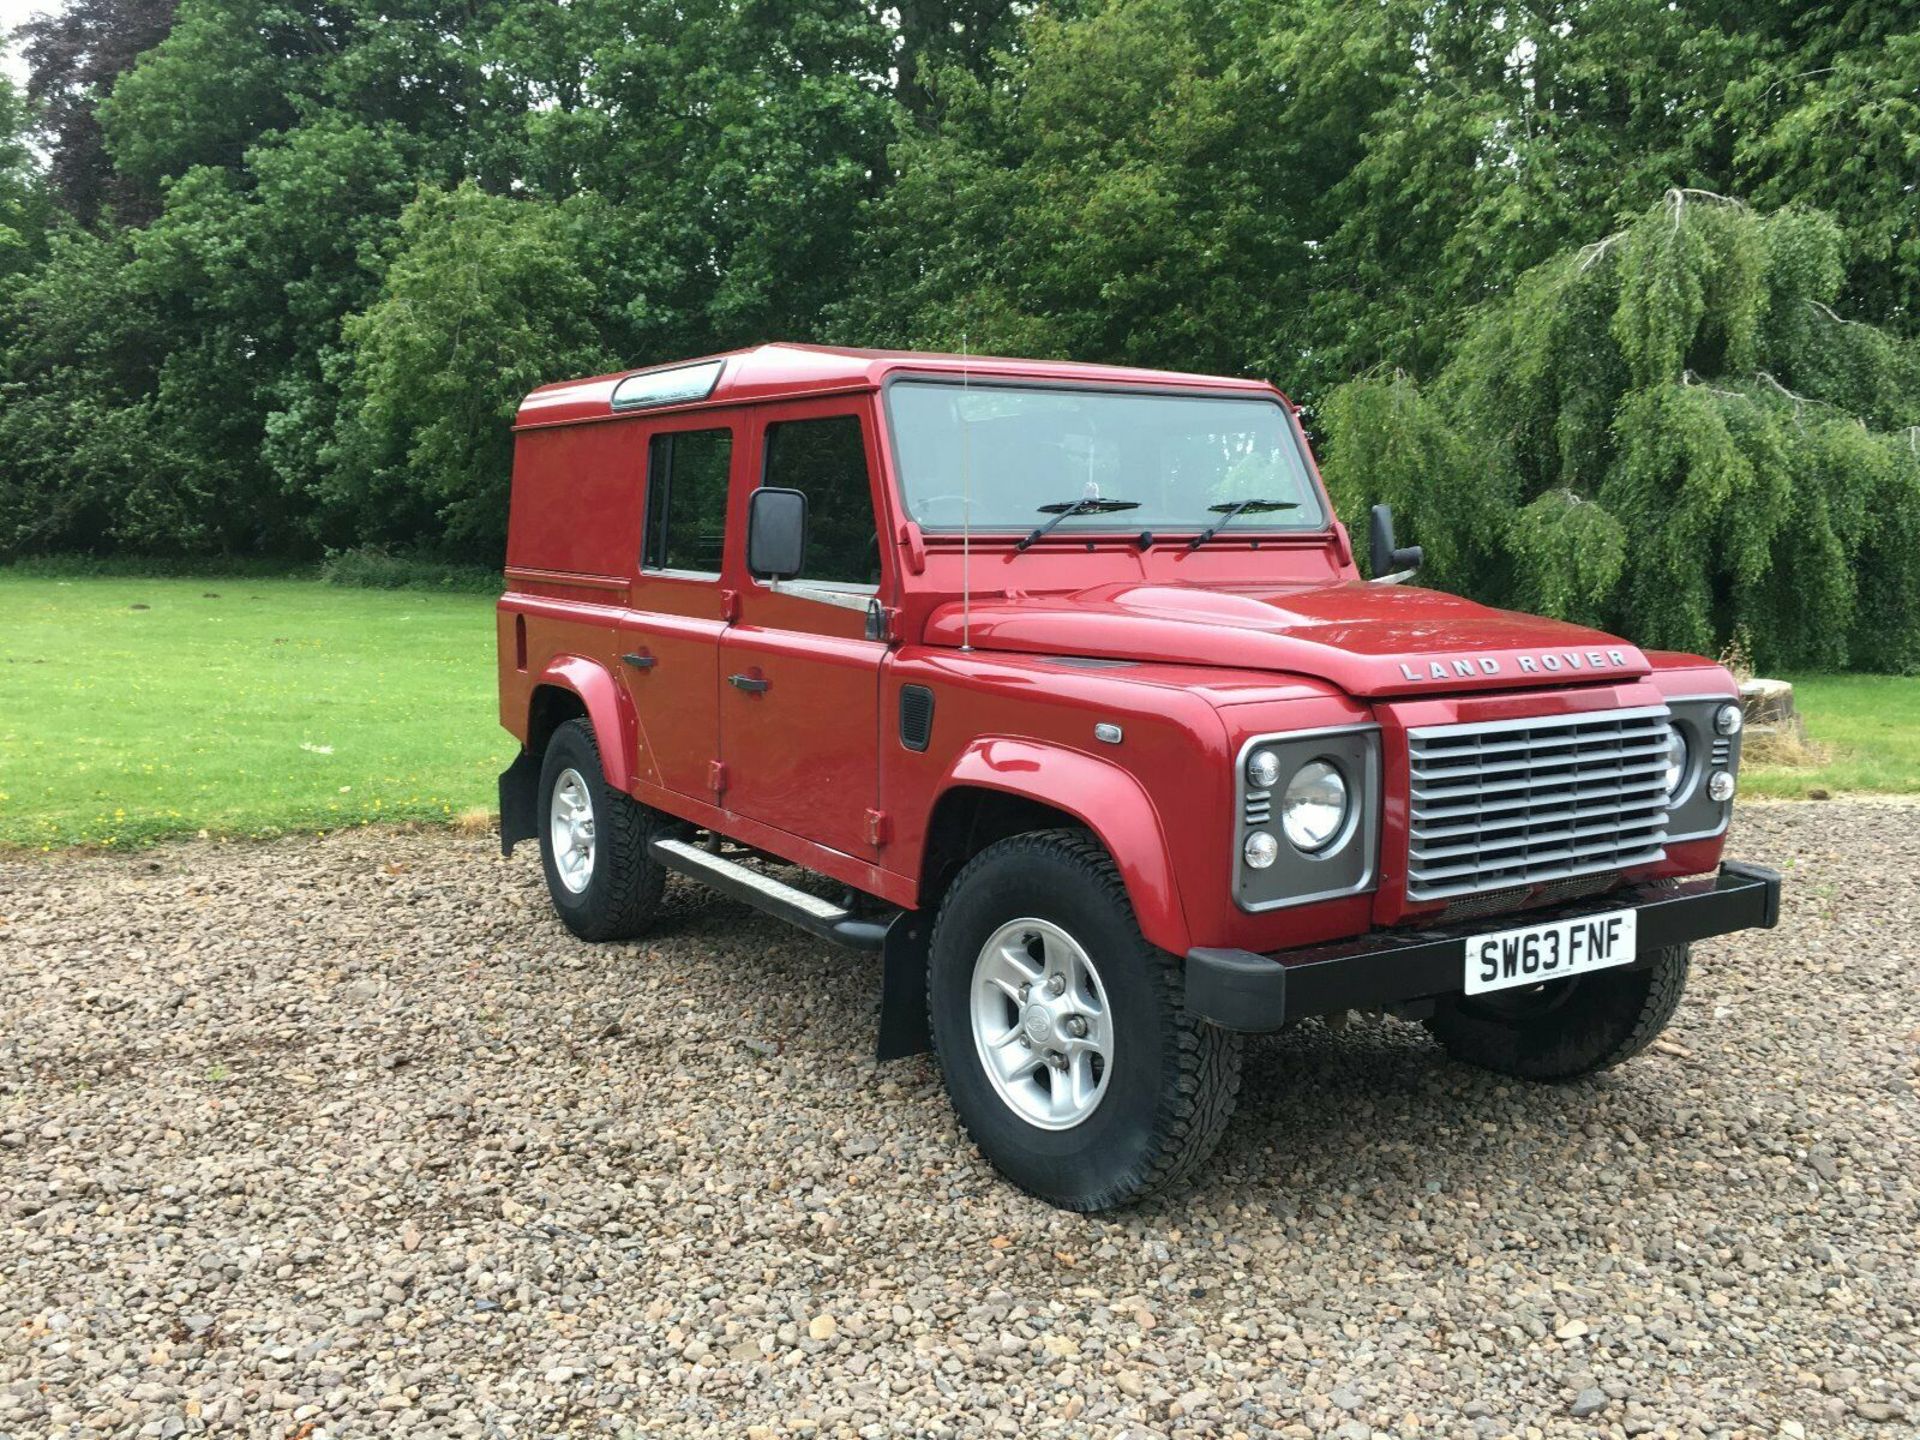 2013/63 REG LAND ROVER DEFENDER 110 TD XS UTILITY WAGON 2.2 DIESEL 125HP, SHOWING 2 FORMER KEEPERS - Image 2 of 9